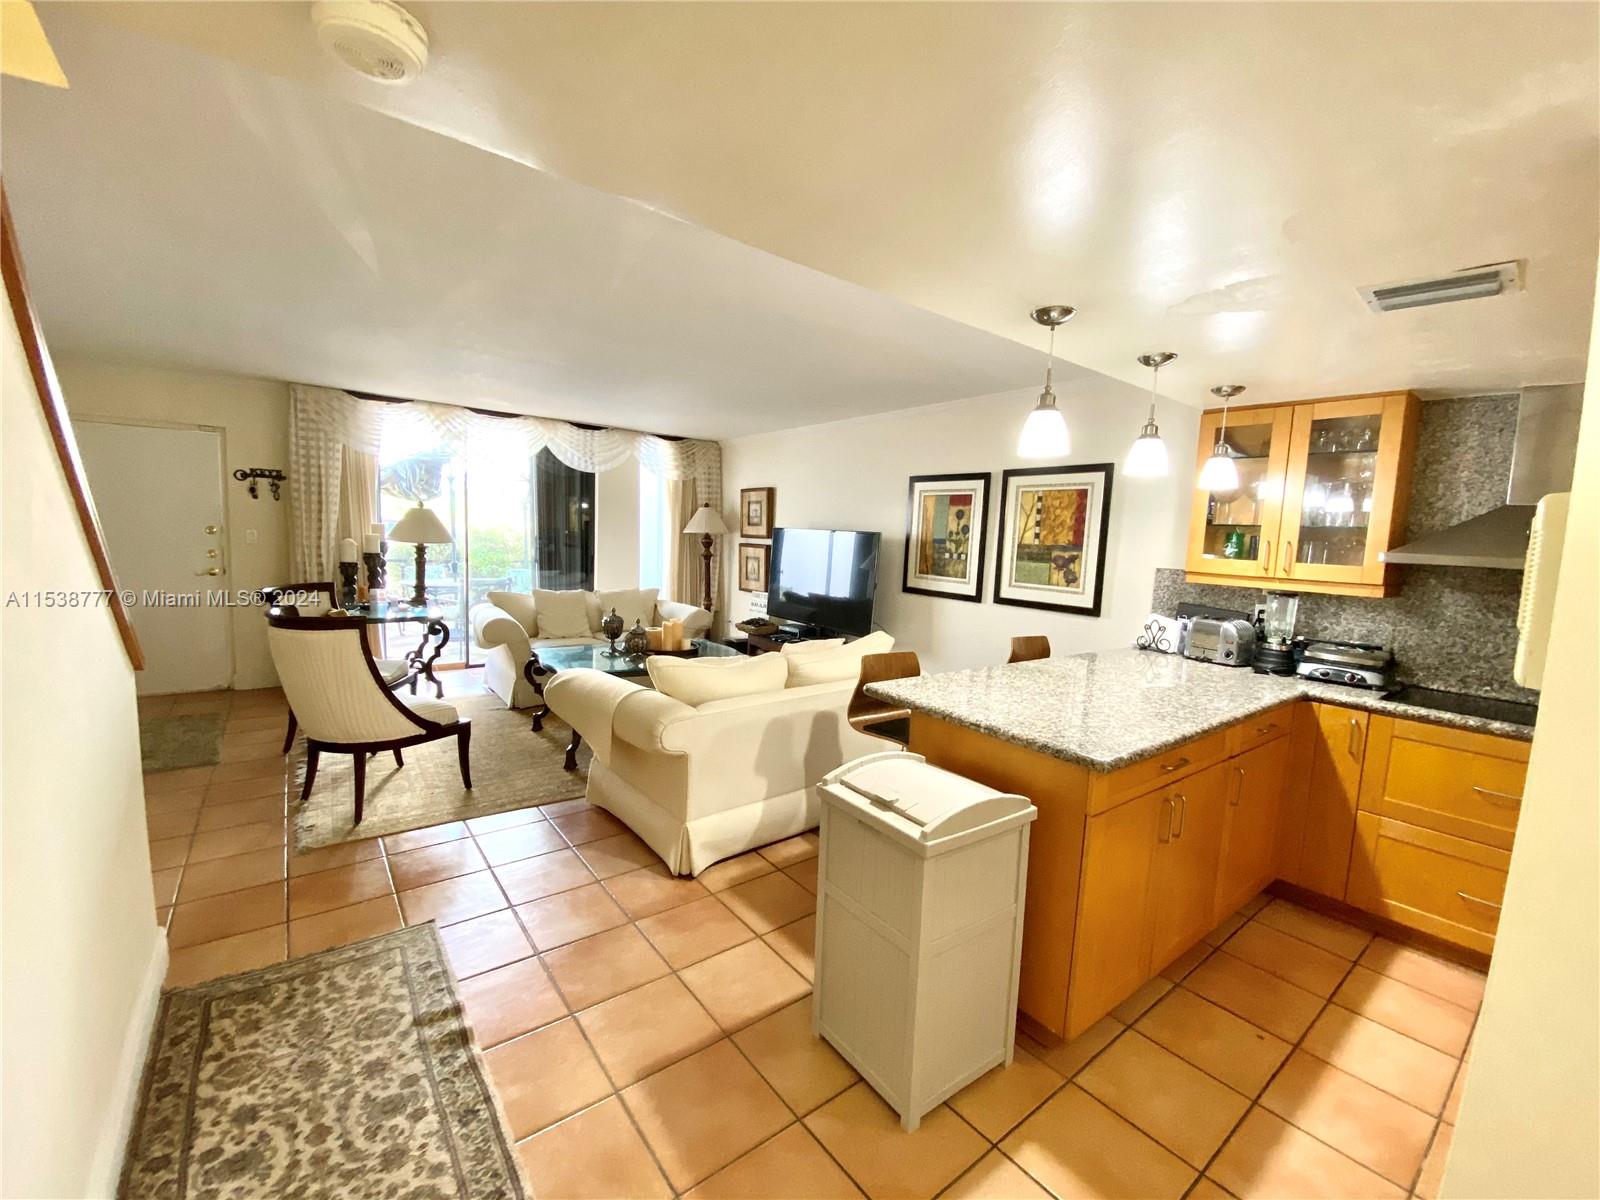 a large living room with stainless steel appliances kitchen island granite countertop a sink and cabinets